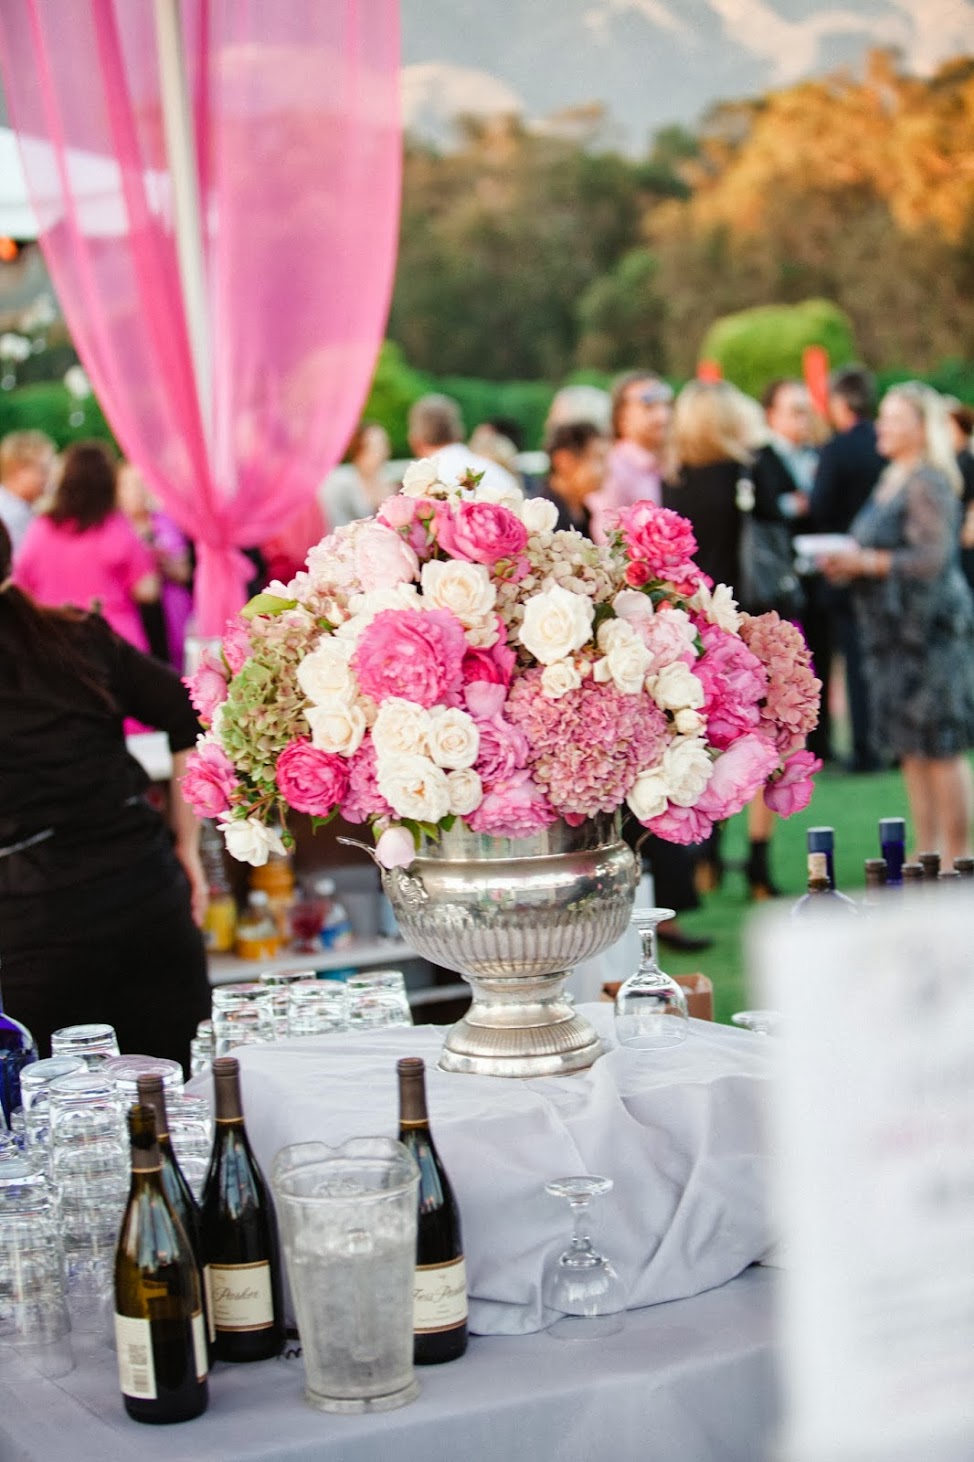 www.FeliciEvents | Pink Polo Party | Funraising Event | Felici Fundraiser | Polo Theme | Clarissa Koenig Photography | Wine Station